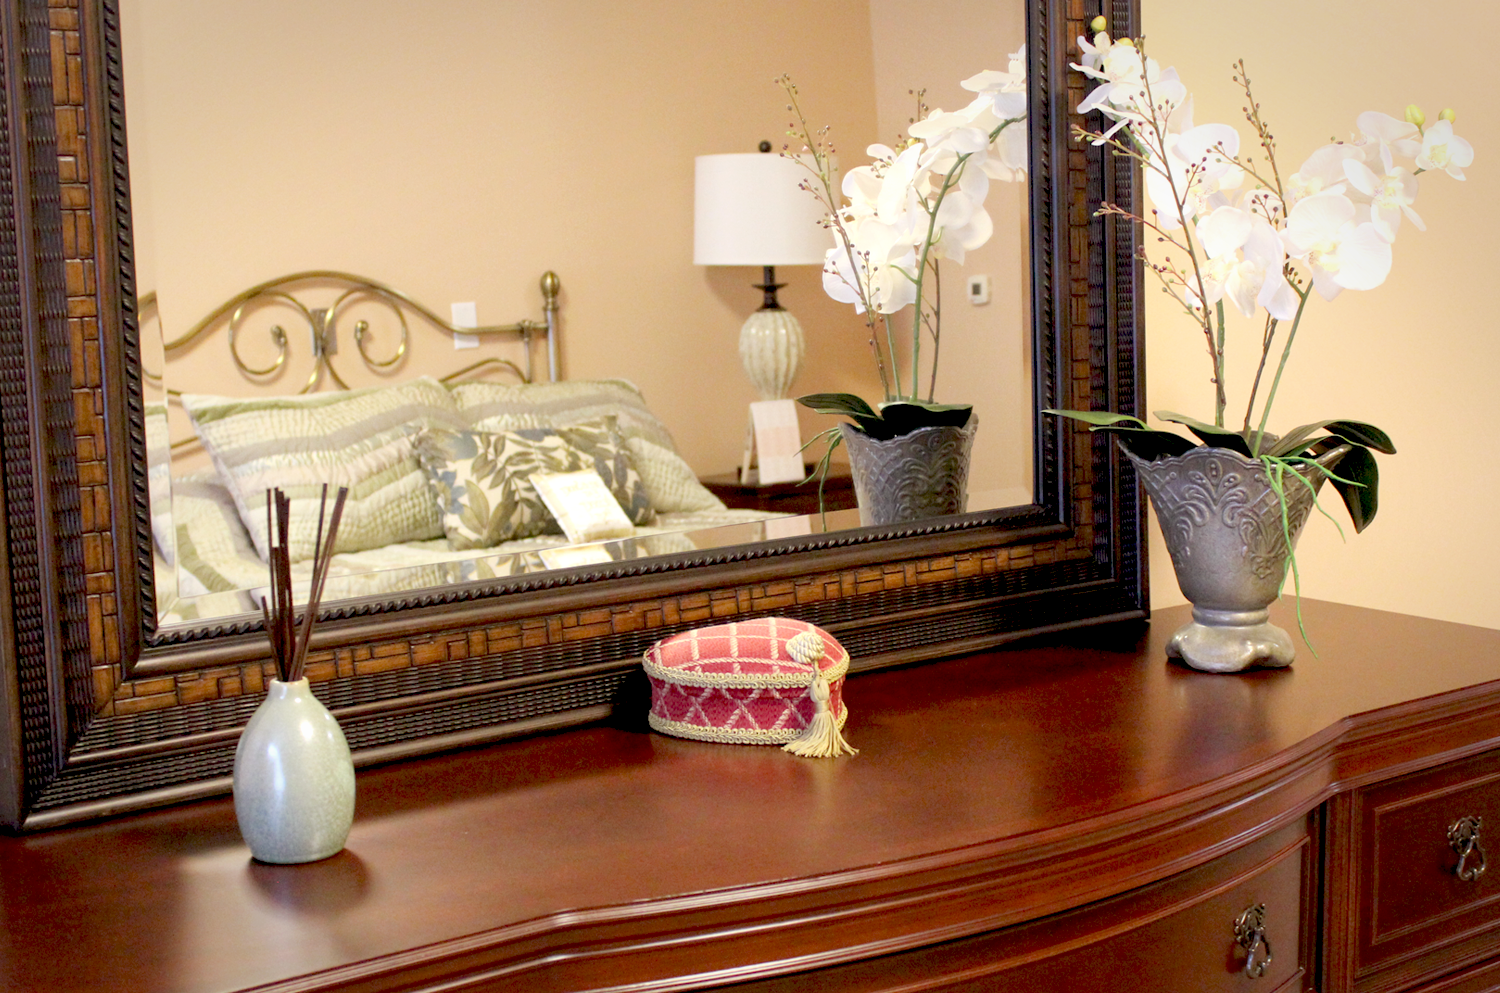 Champlain Bedroom Mirror. Click to view larger image.